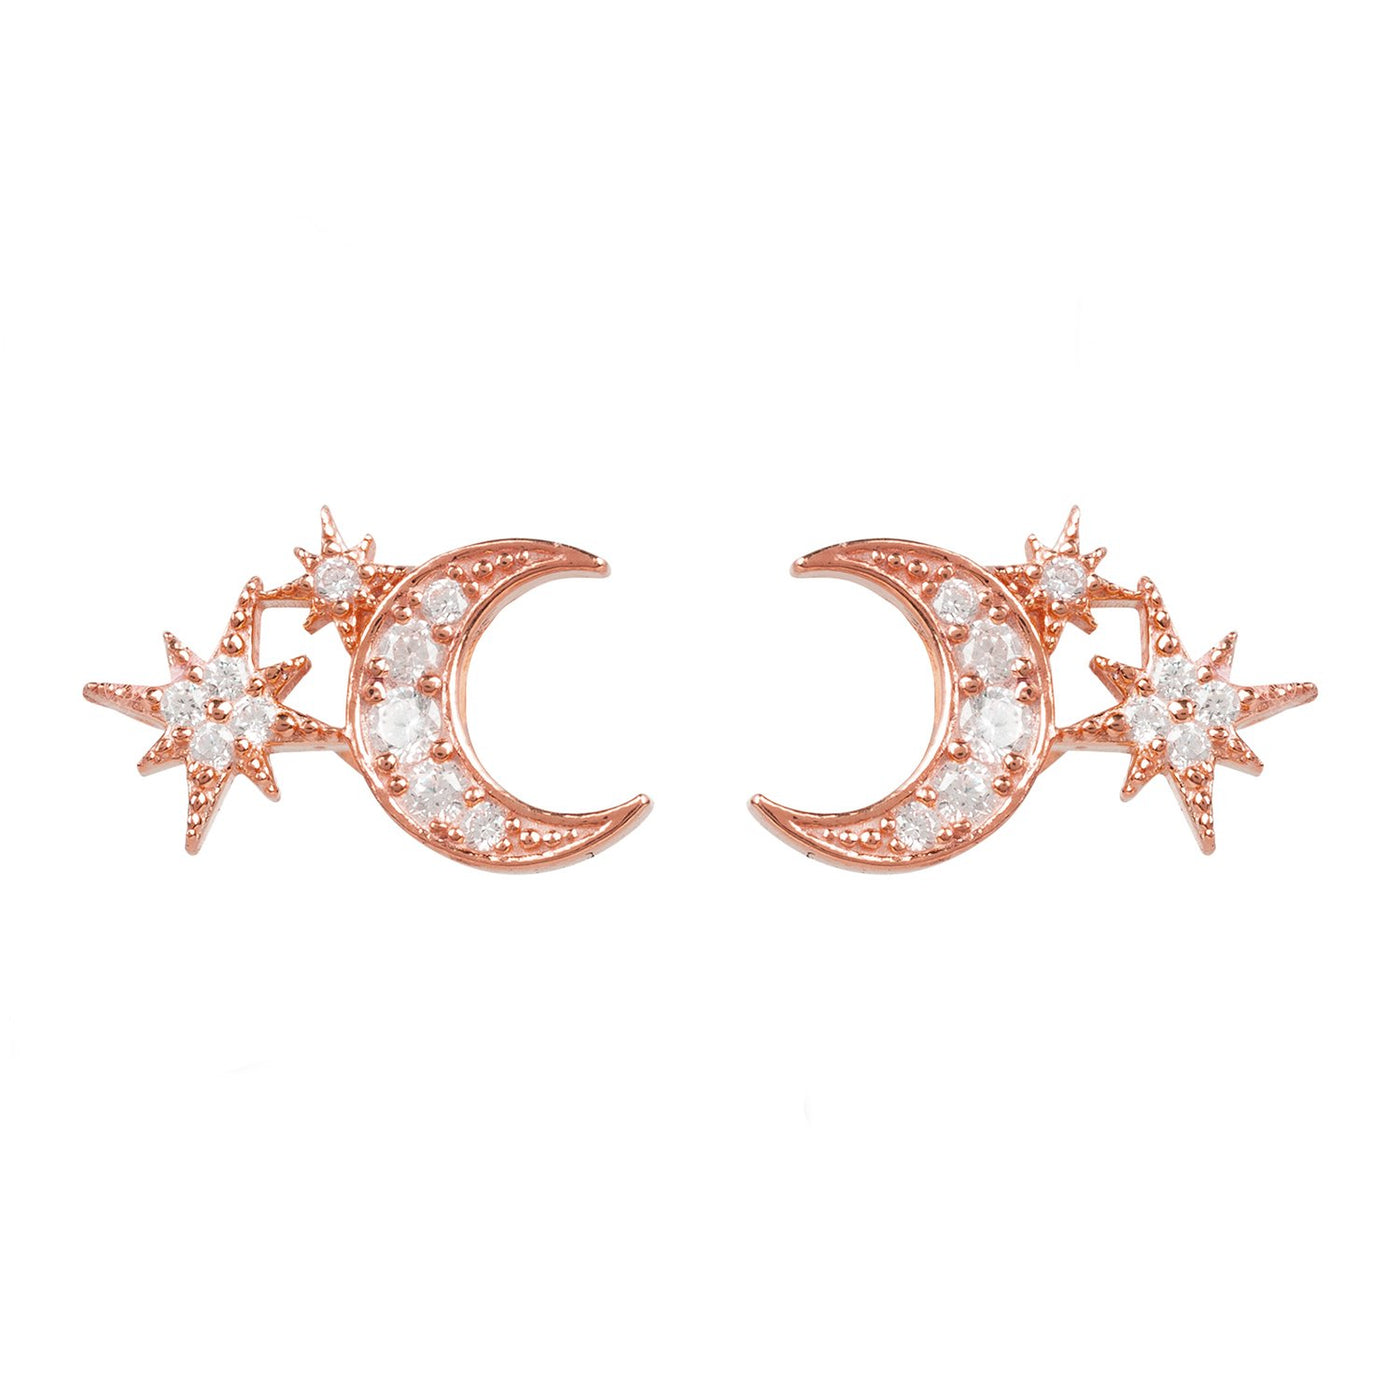 Stud earrings - moon and stars - 22 carat gold plated (rose gold) - zircons